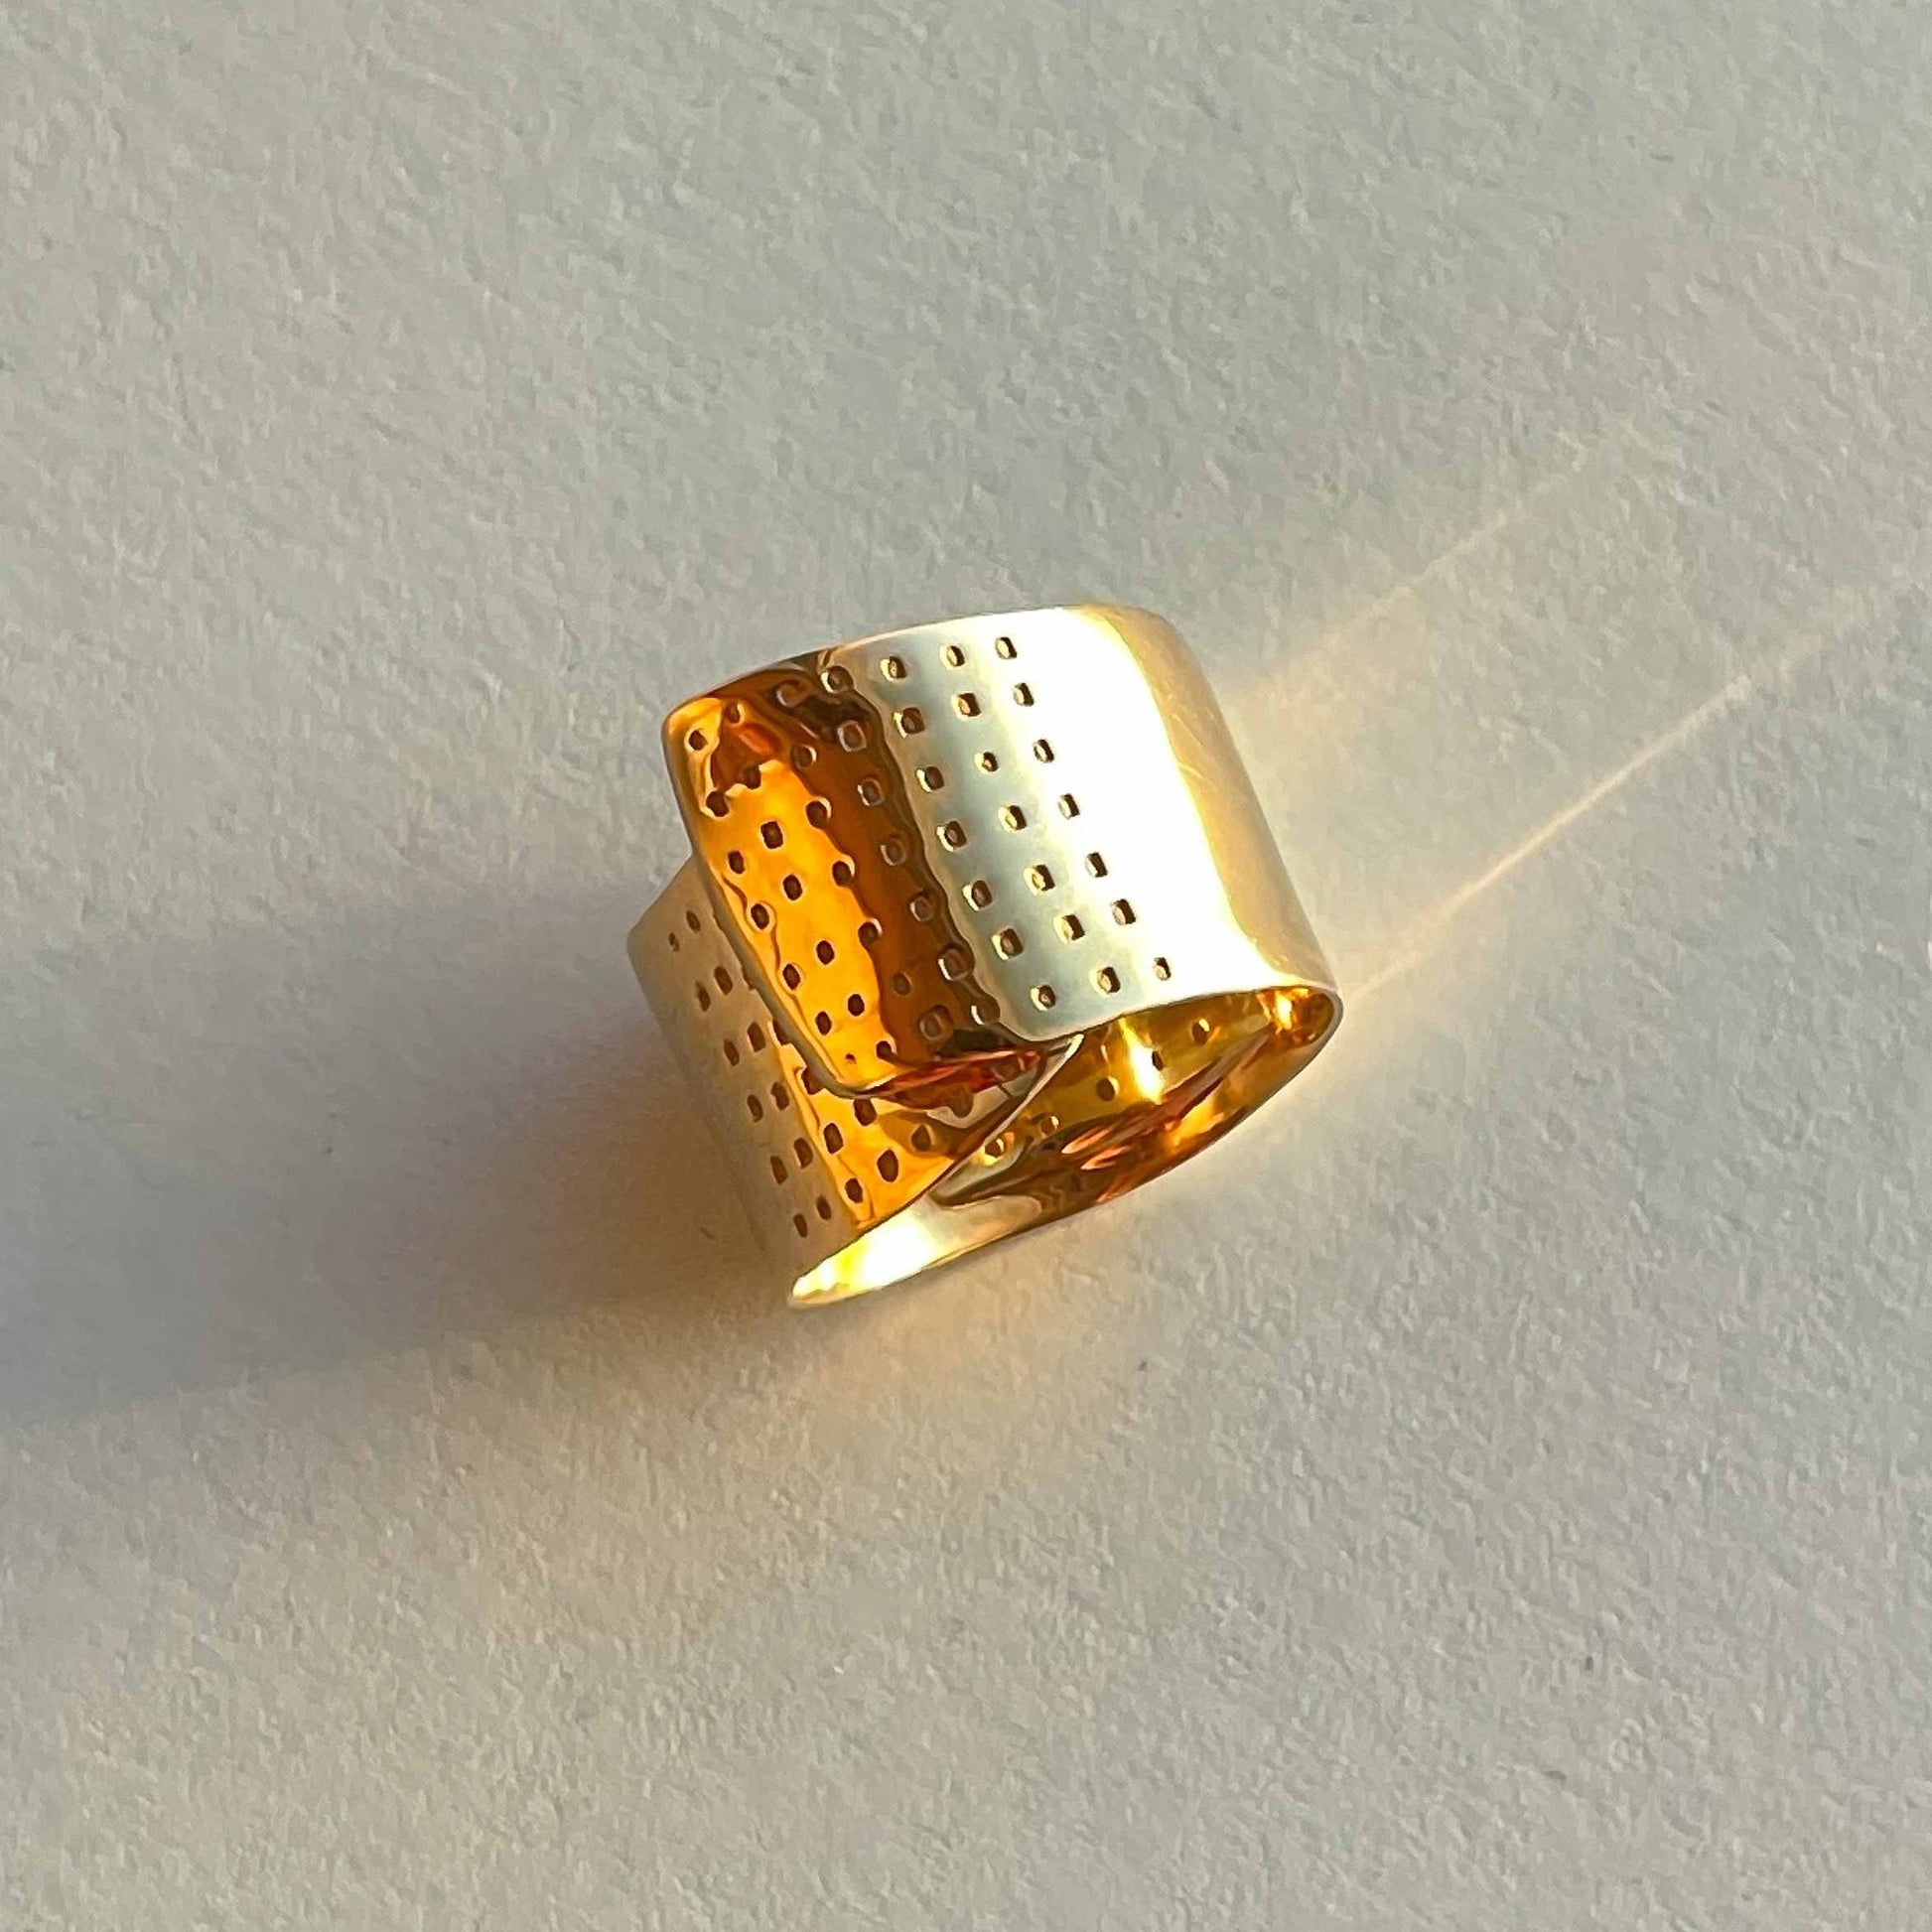 RING "SAVE ME" / SOLID GOLD